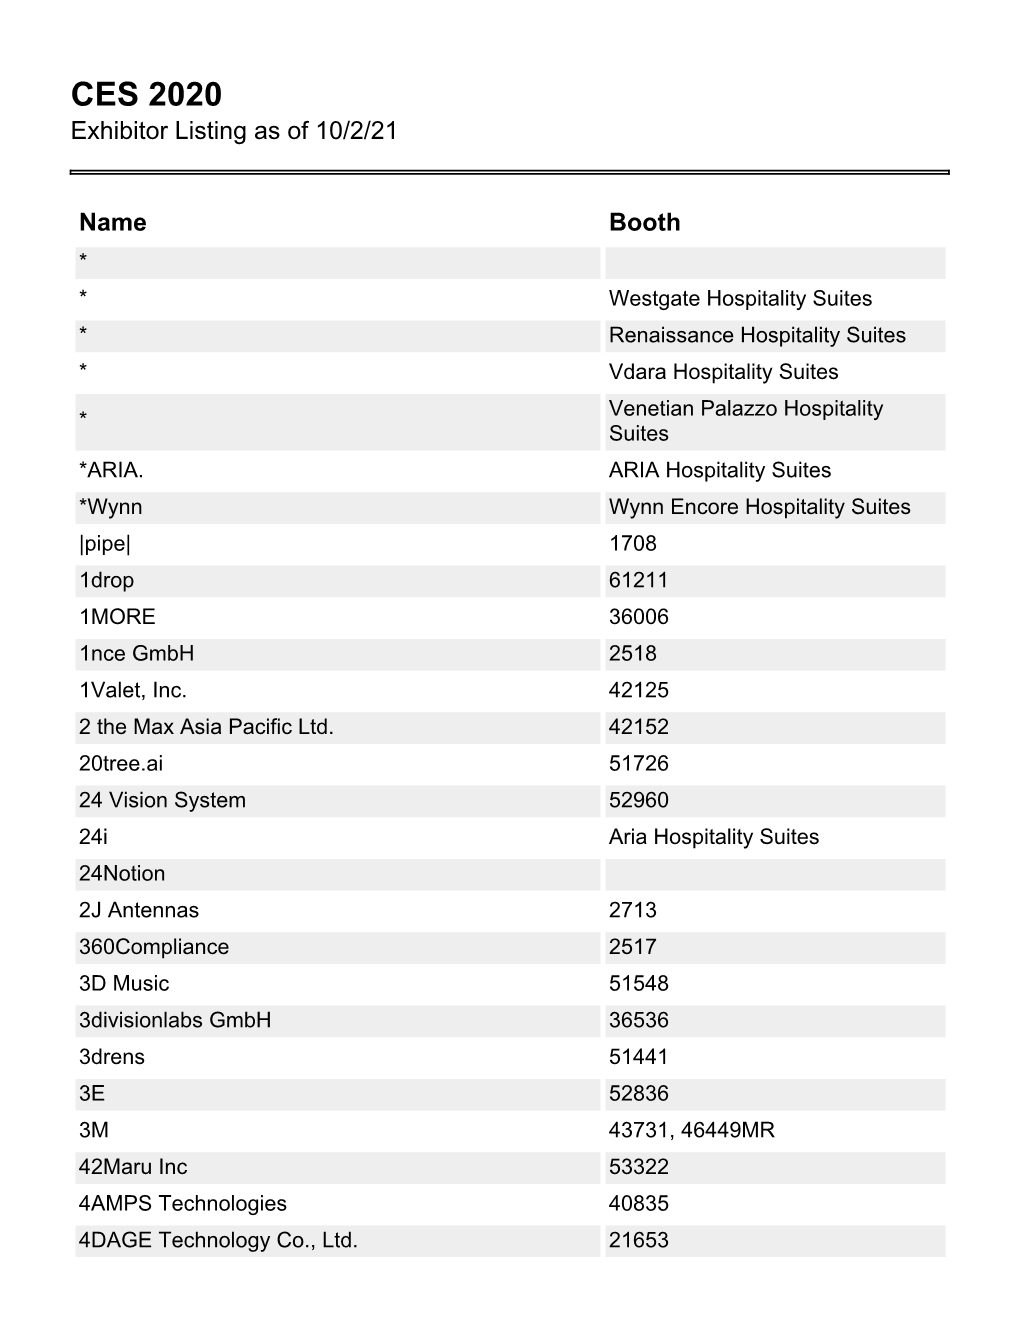 CES 2020 Exhibitor Listing As of 10/2/21